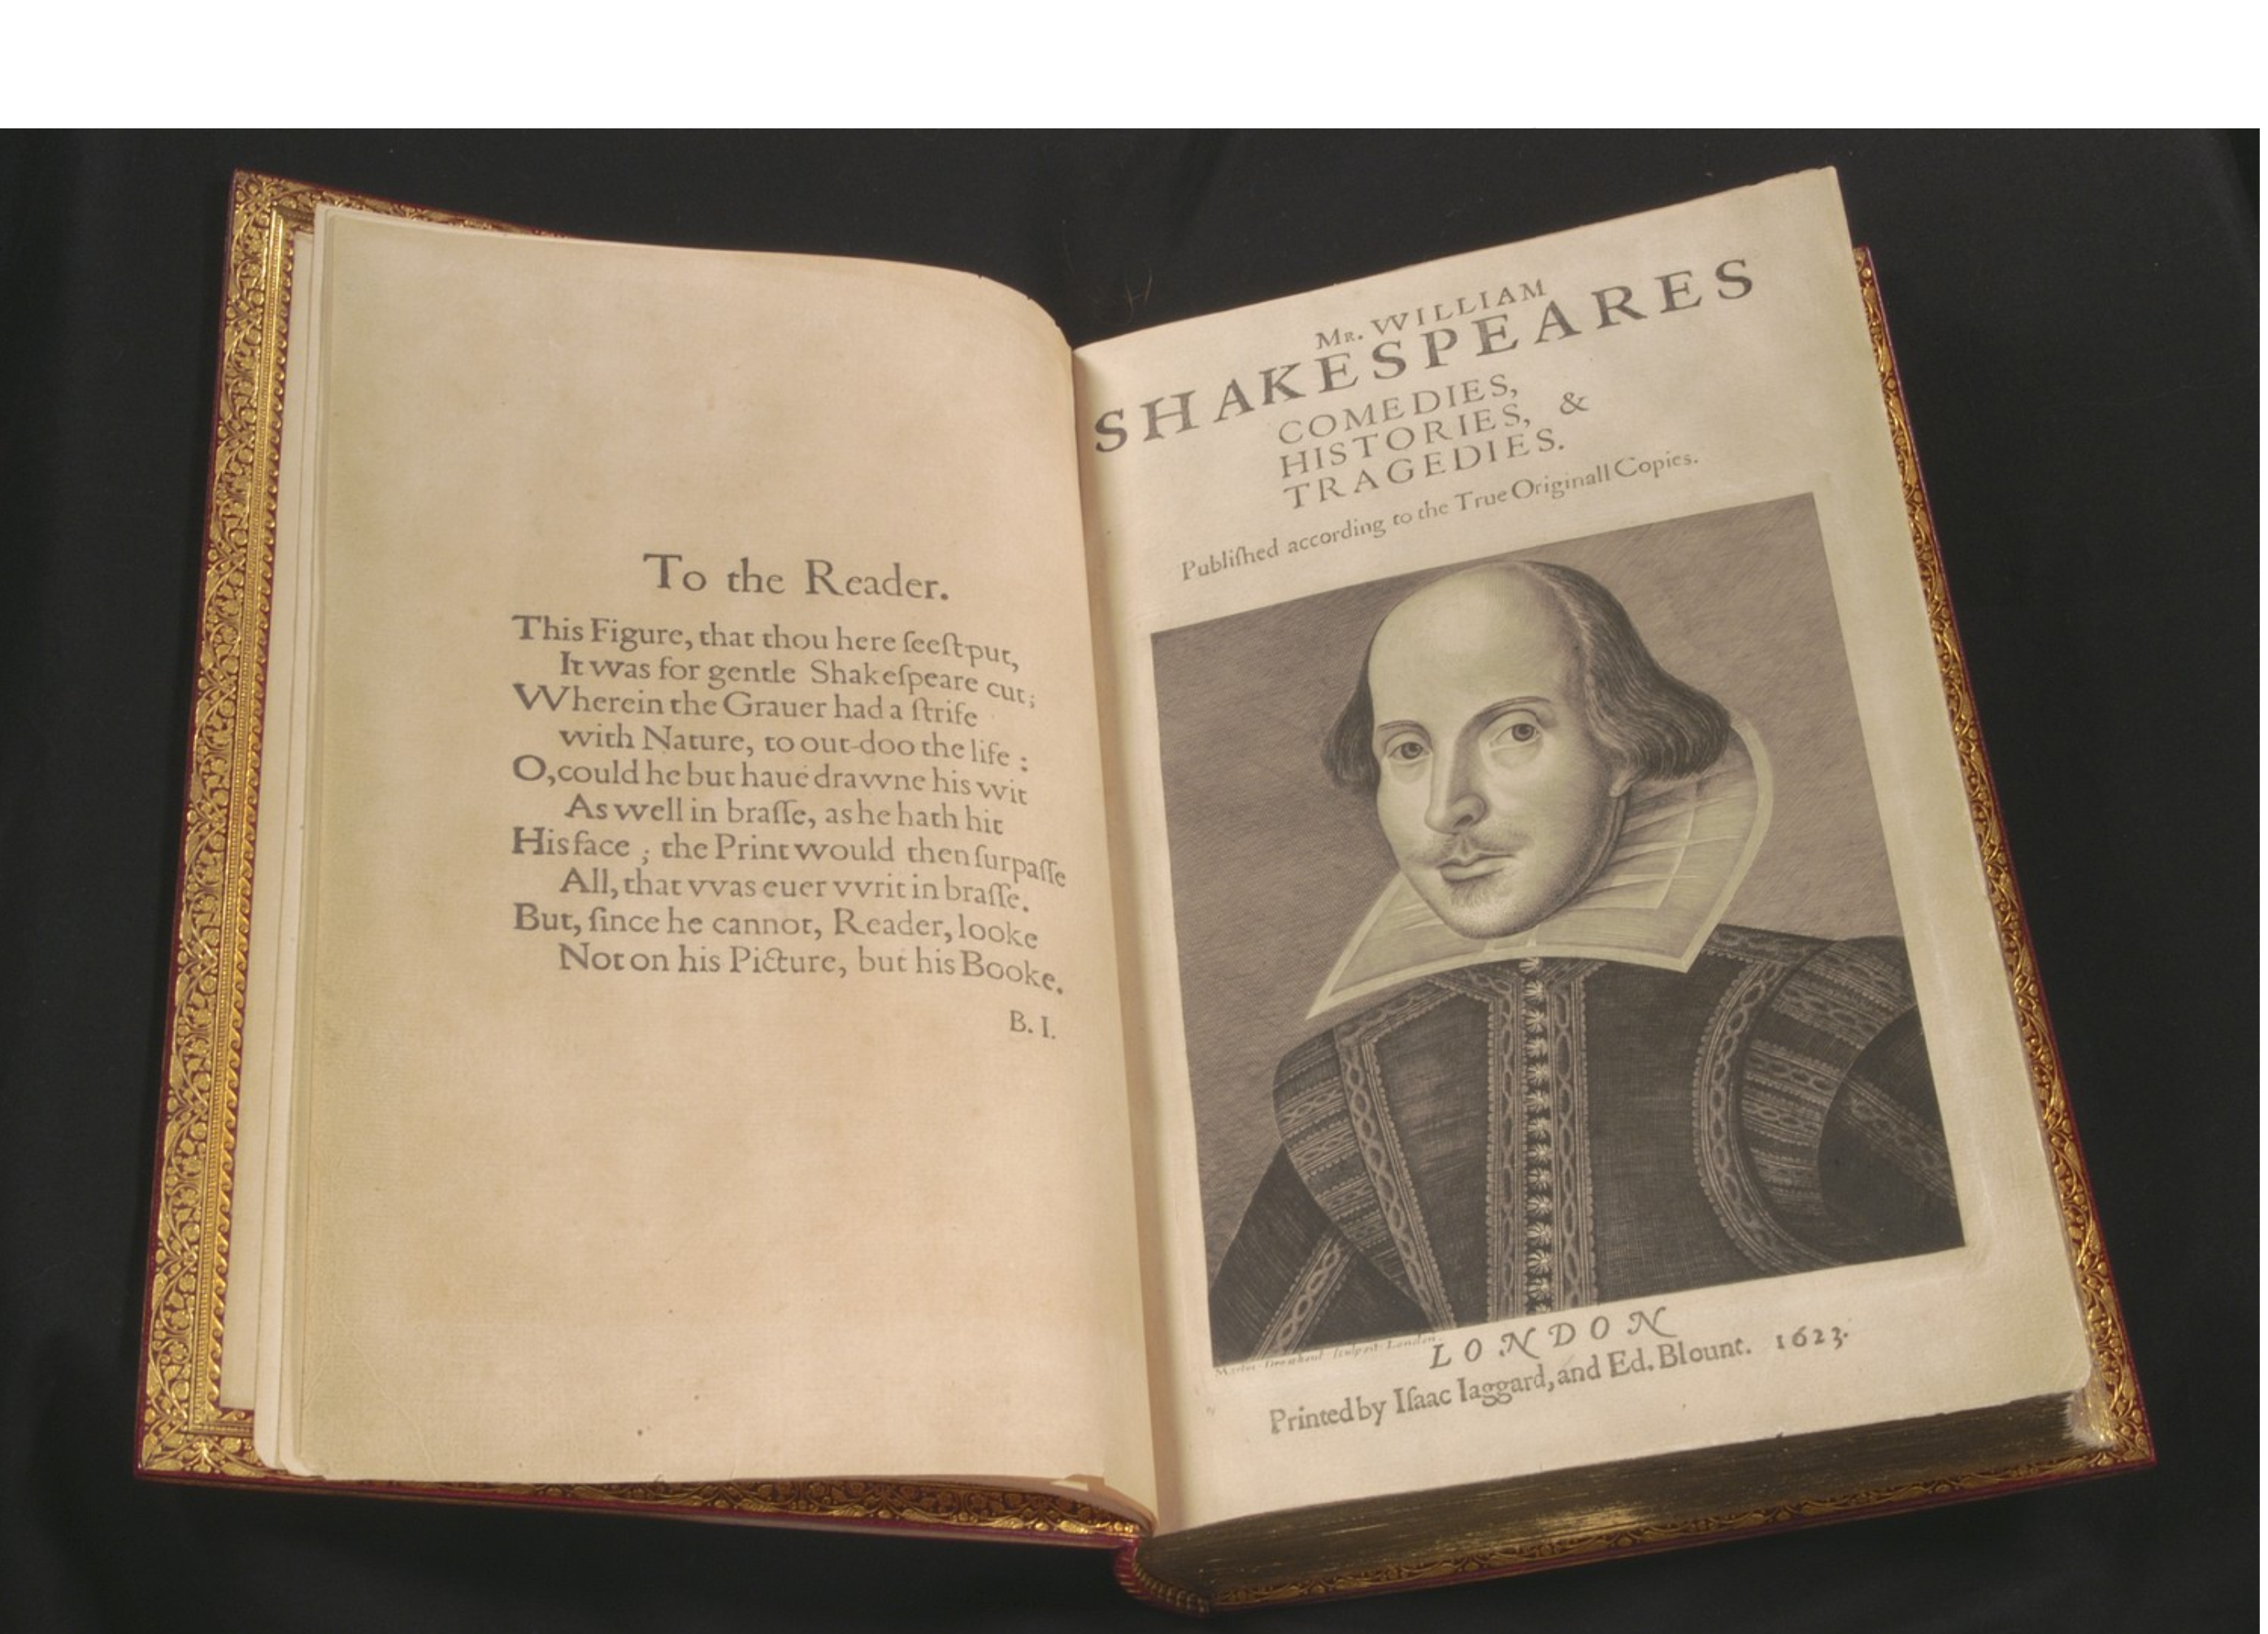 Cornell University Library's copy of the first edition of Shakespeare's collected plays published in 1623